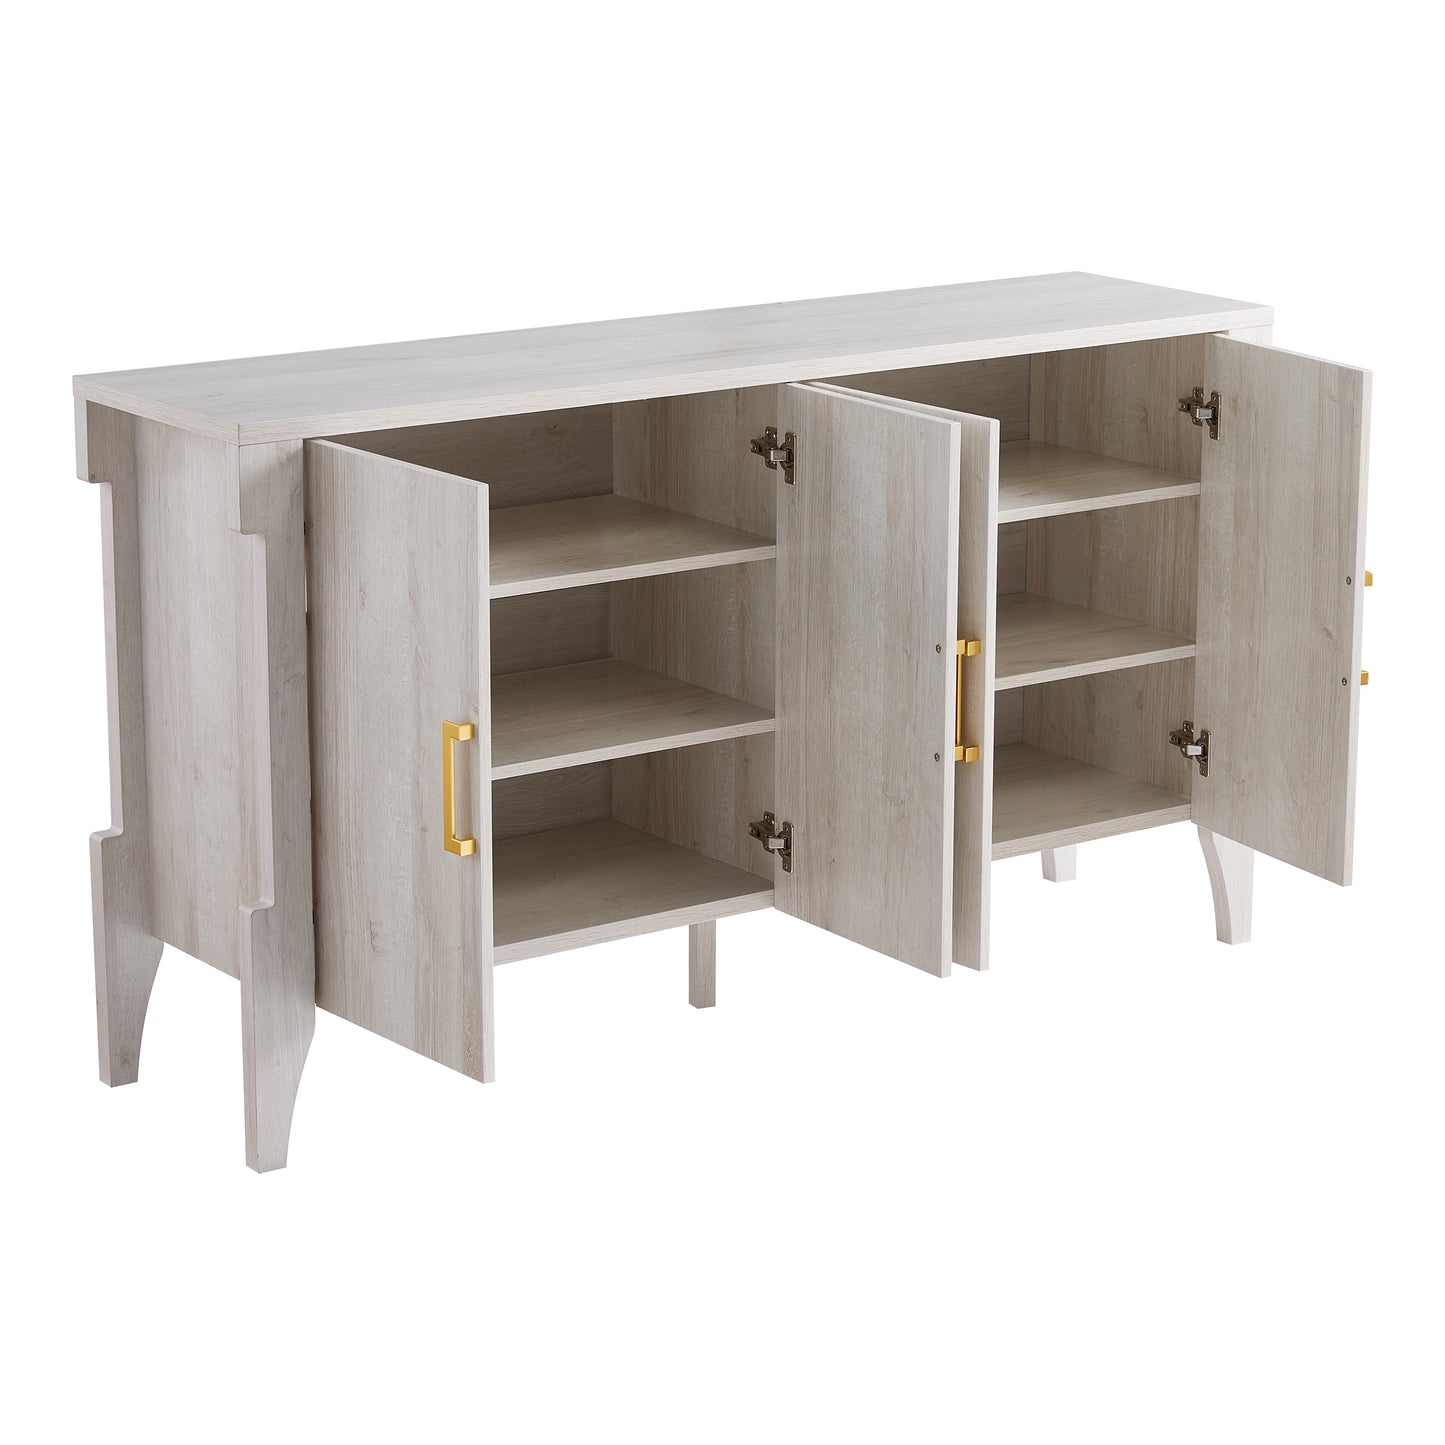 Right angled transitional white oak four-door six-shelf buffet with doors open on a white background